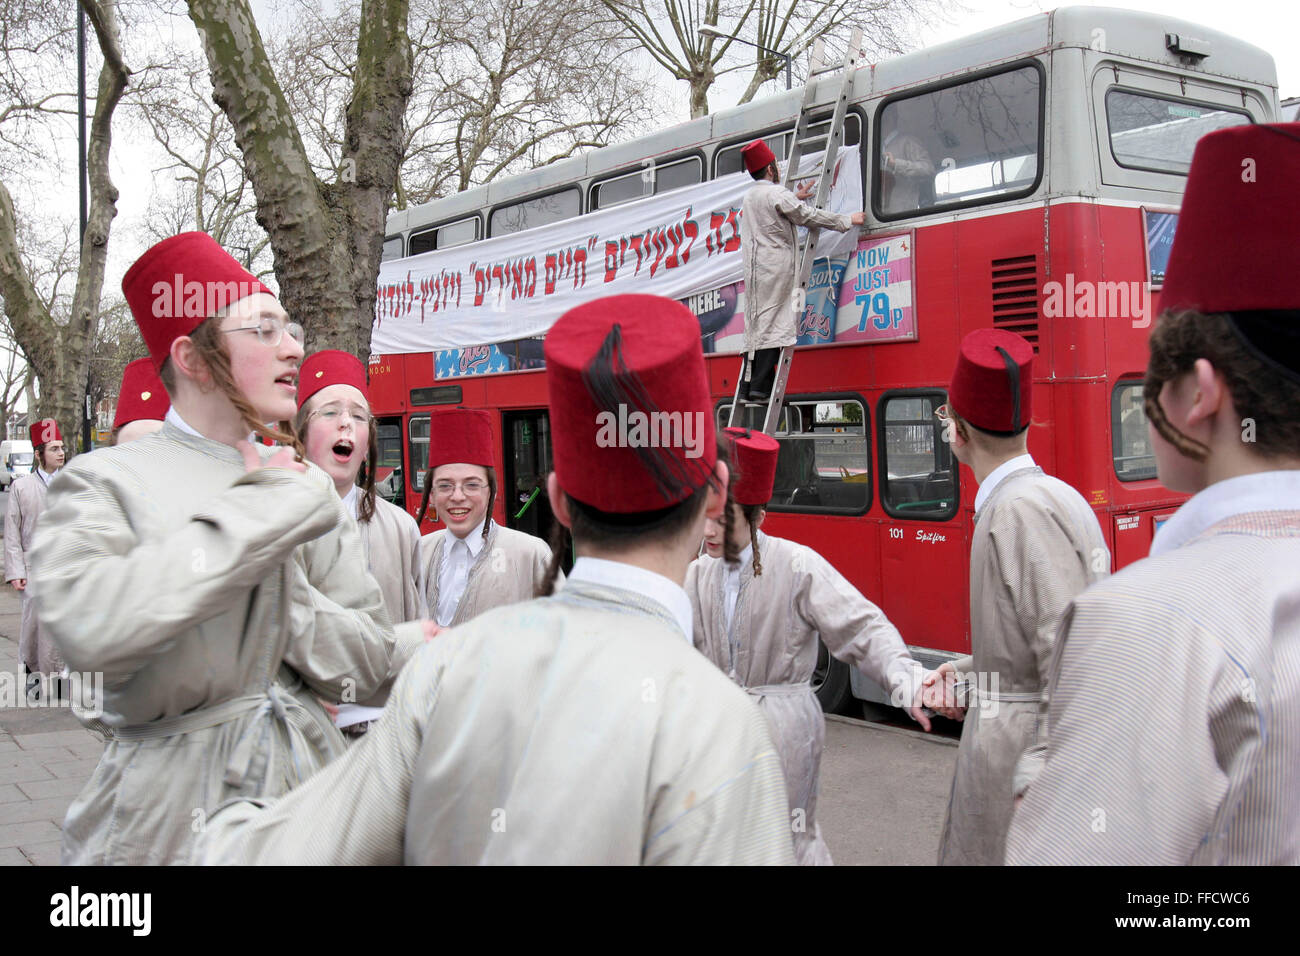 A group of Orthodox Jewish boys from the Viznitz Yeshiva (school) dressed in fancy dress sing and dance in the street. Other members of the group decorate the double-decker bus with banners that they will travel on for the Jewish festival of Purim. They will visit several local wealthy businessmen collecting money for their school. Stock Photo